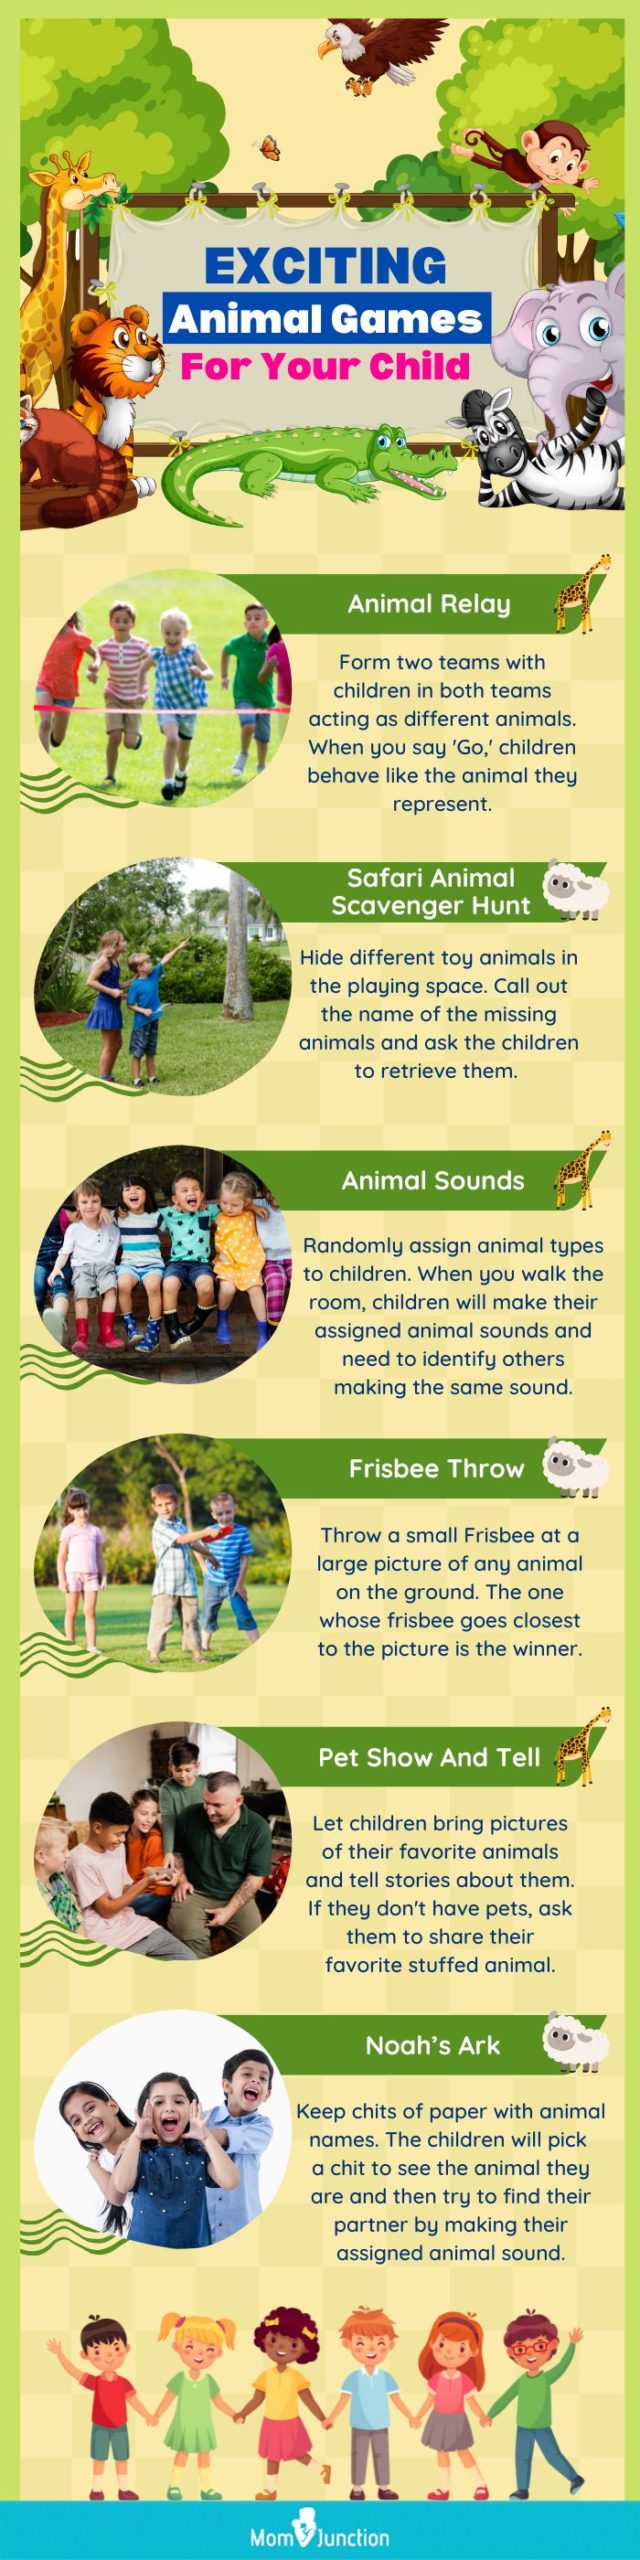 exciting animal games for your child (infographic)